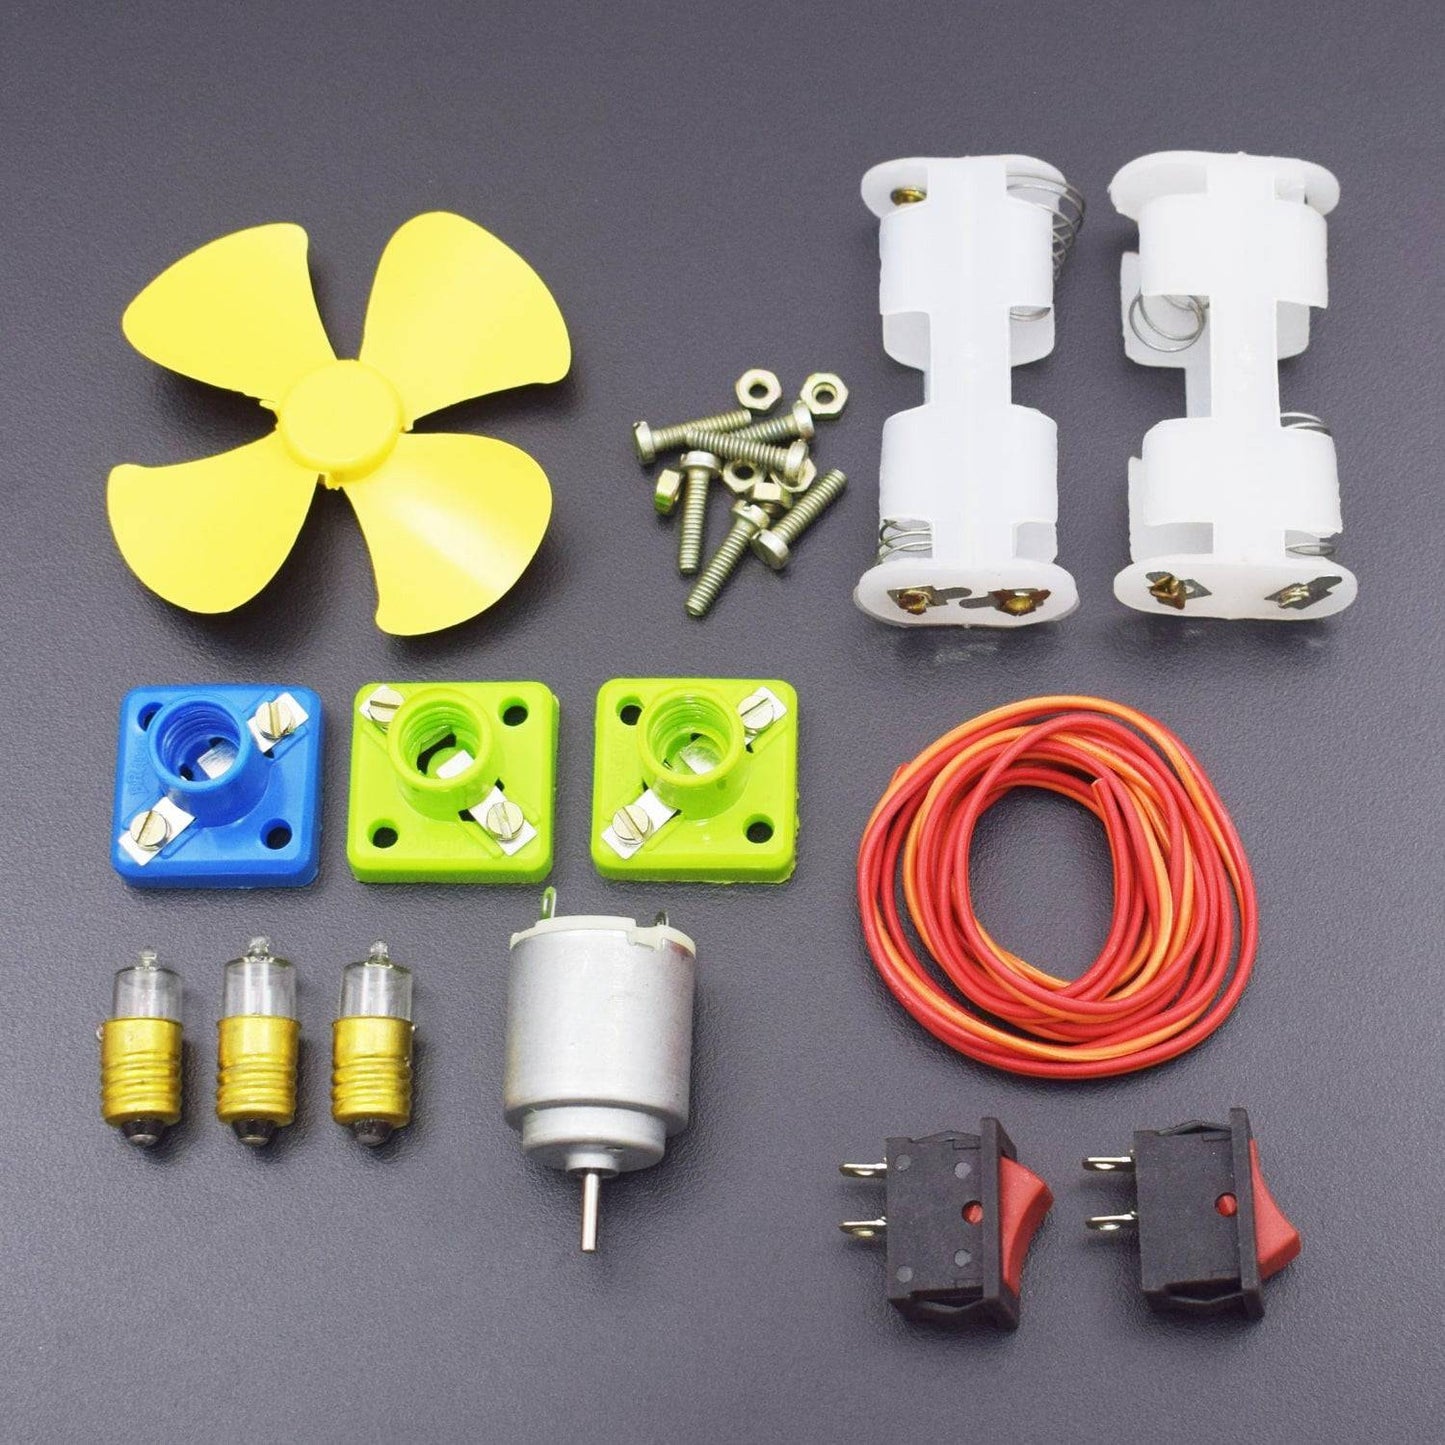 Electronics 25 Items Loose Parts Materials Science Project Kit (Multicolour)-KT1088 - REES52